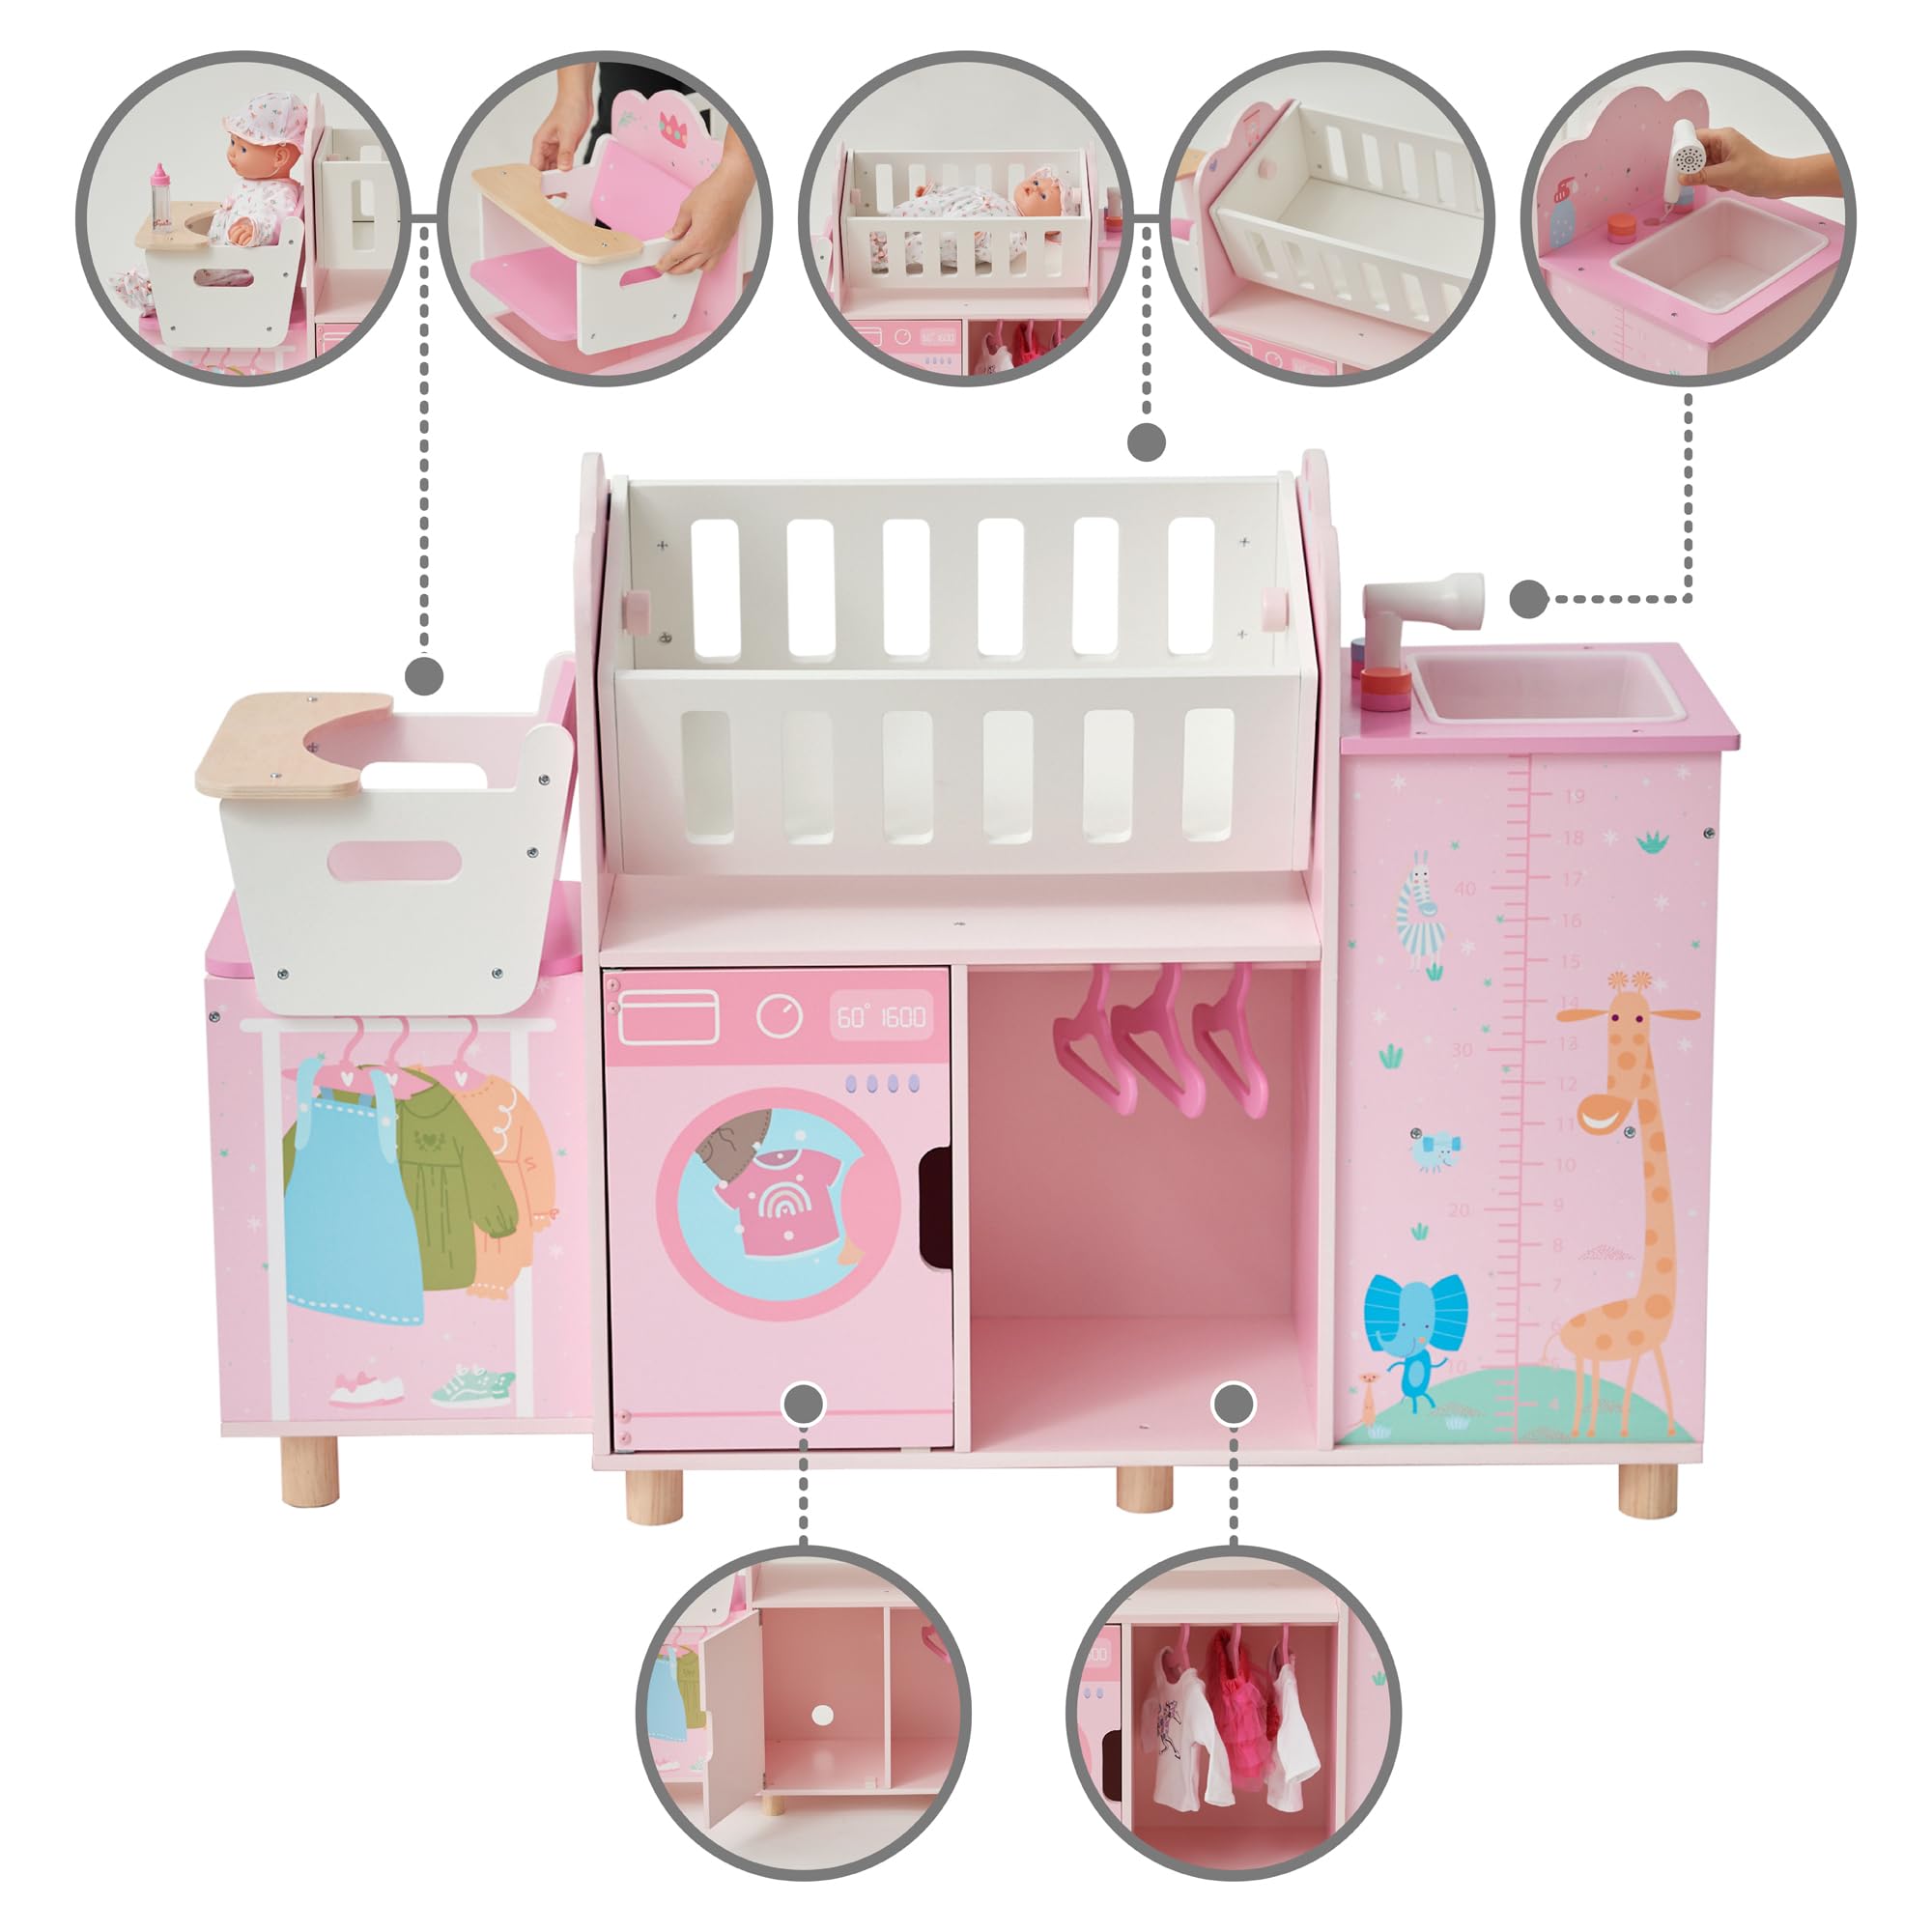 Olivia's Little World - Baby Doll Nursery Station Amanda Playset with Clothing Hangers, Detachable Highchair, Rocking Cradle, Washing Machine, Role Play Nursery Center with Storage, Baby Pink, Ages 3+